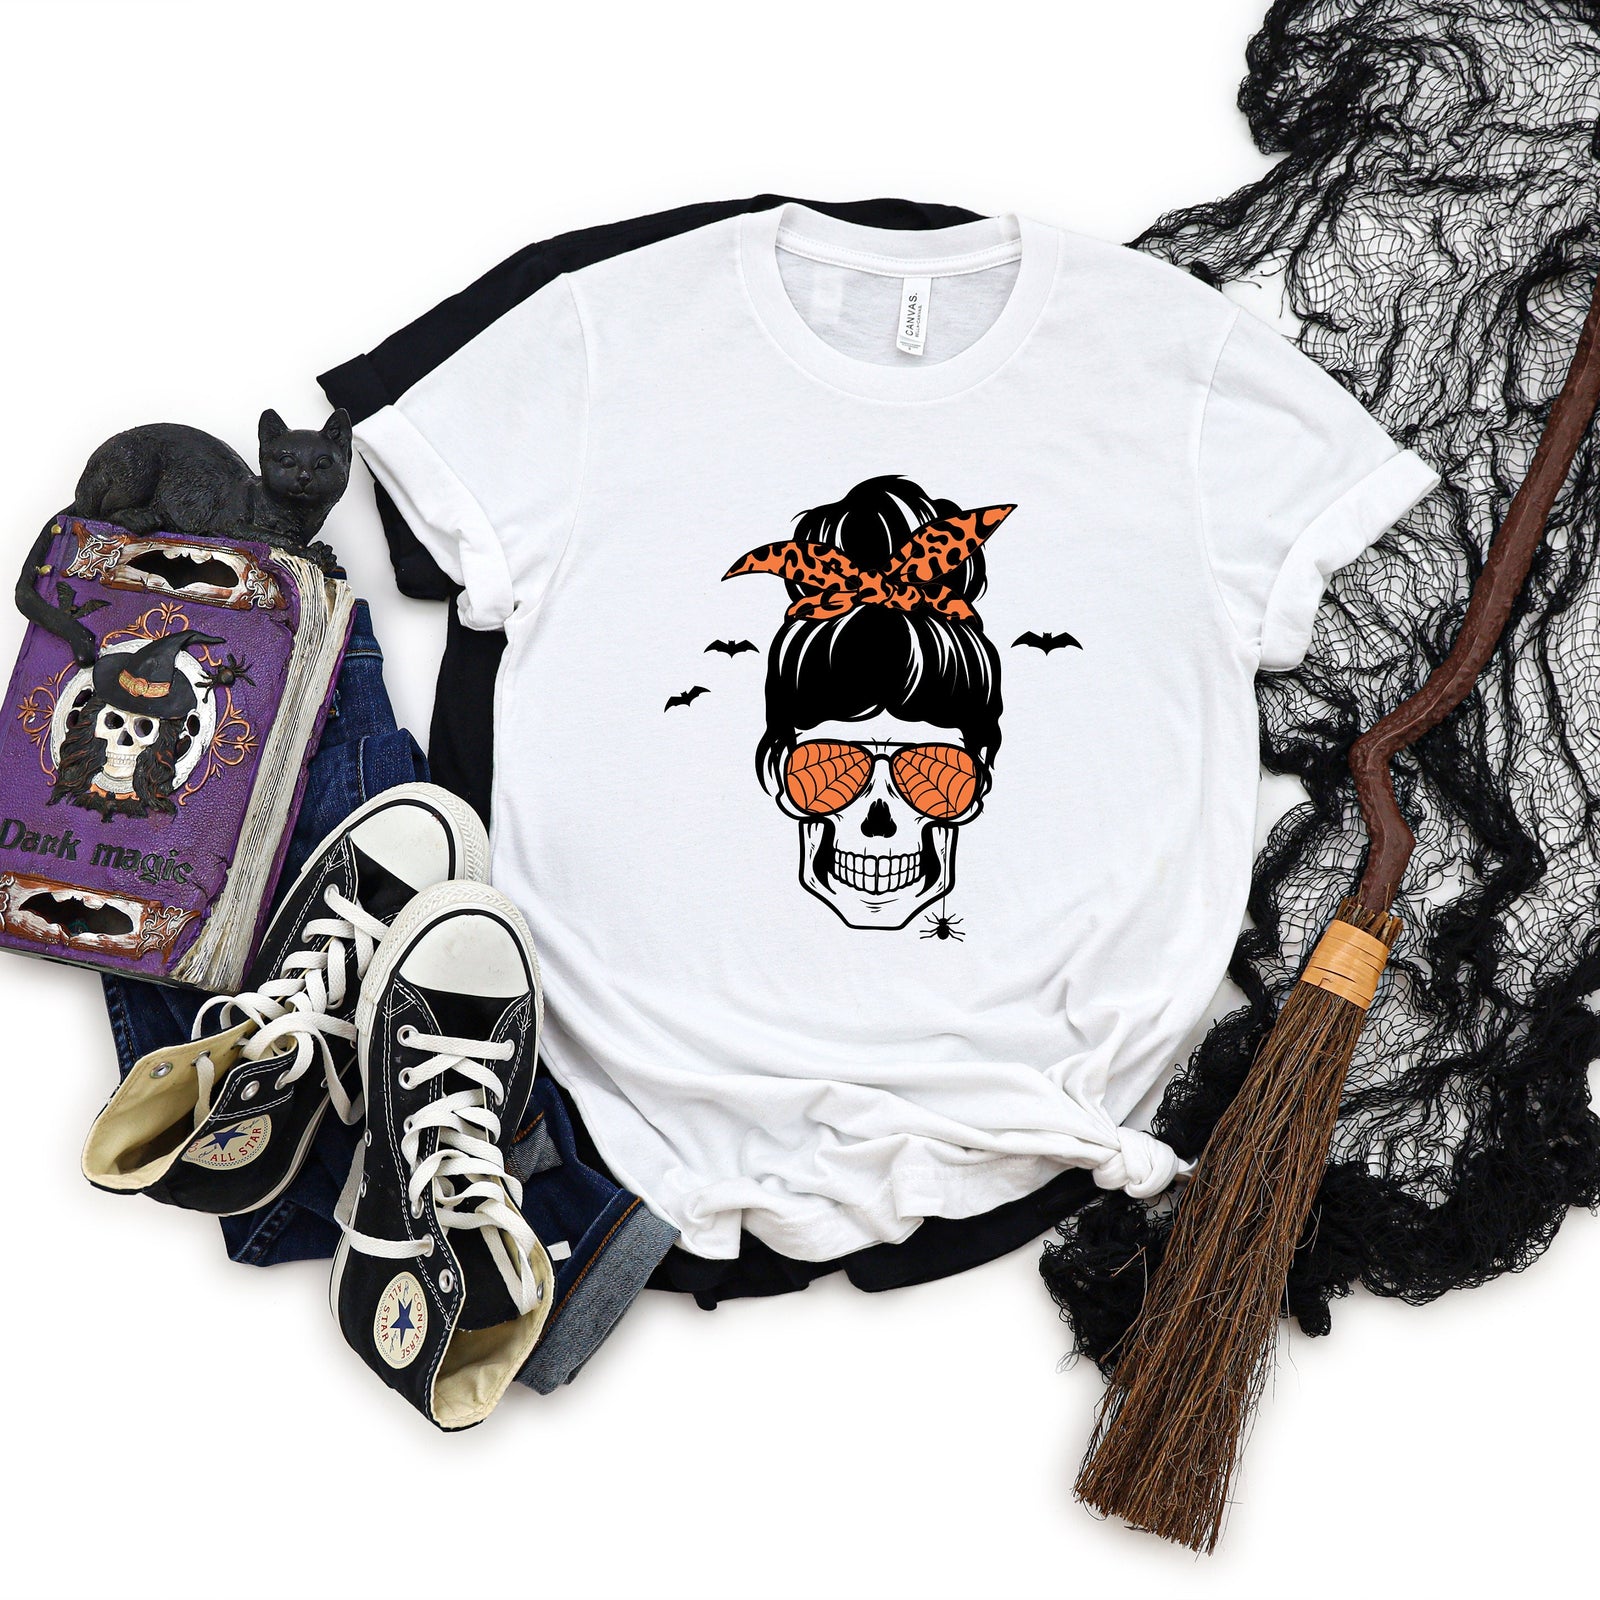 Momster - Happy Halloween Adult T Shirt - Mom T Shirt - Funny T Shirts - Skull - Skeleton Face with Bandana